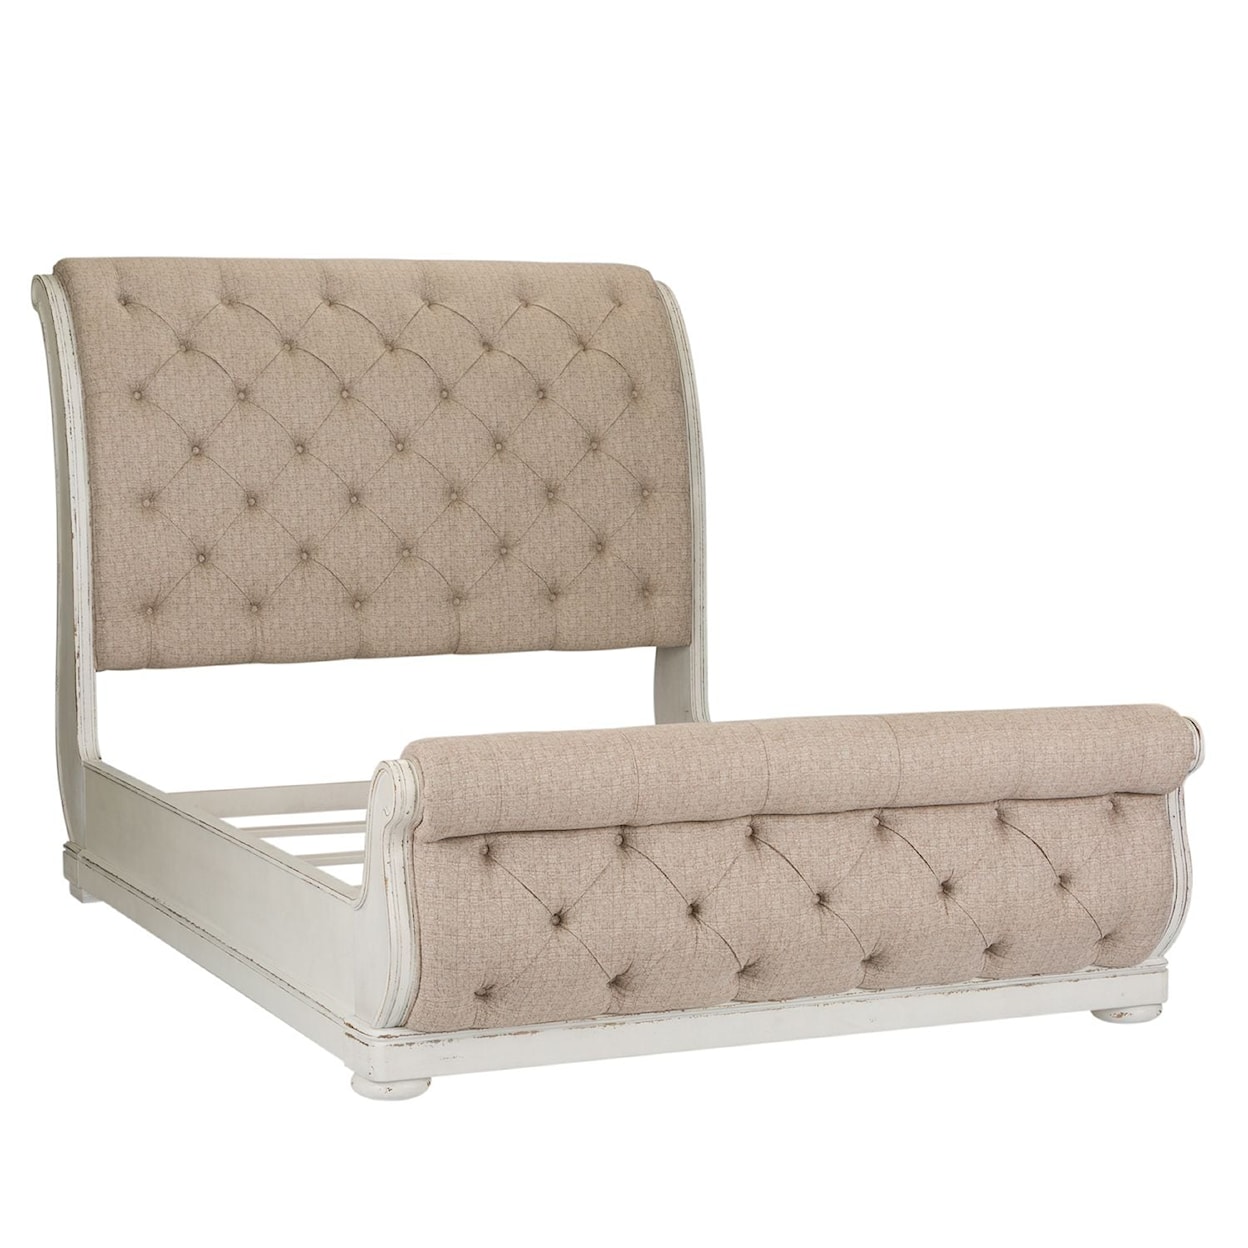 Libby Abbey Park 3-Piece Upholstered Queen Sleigh Bedroom Set